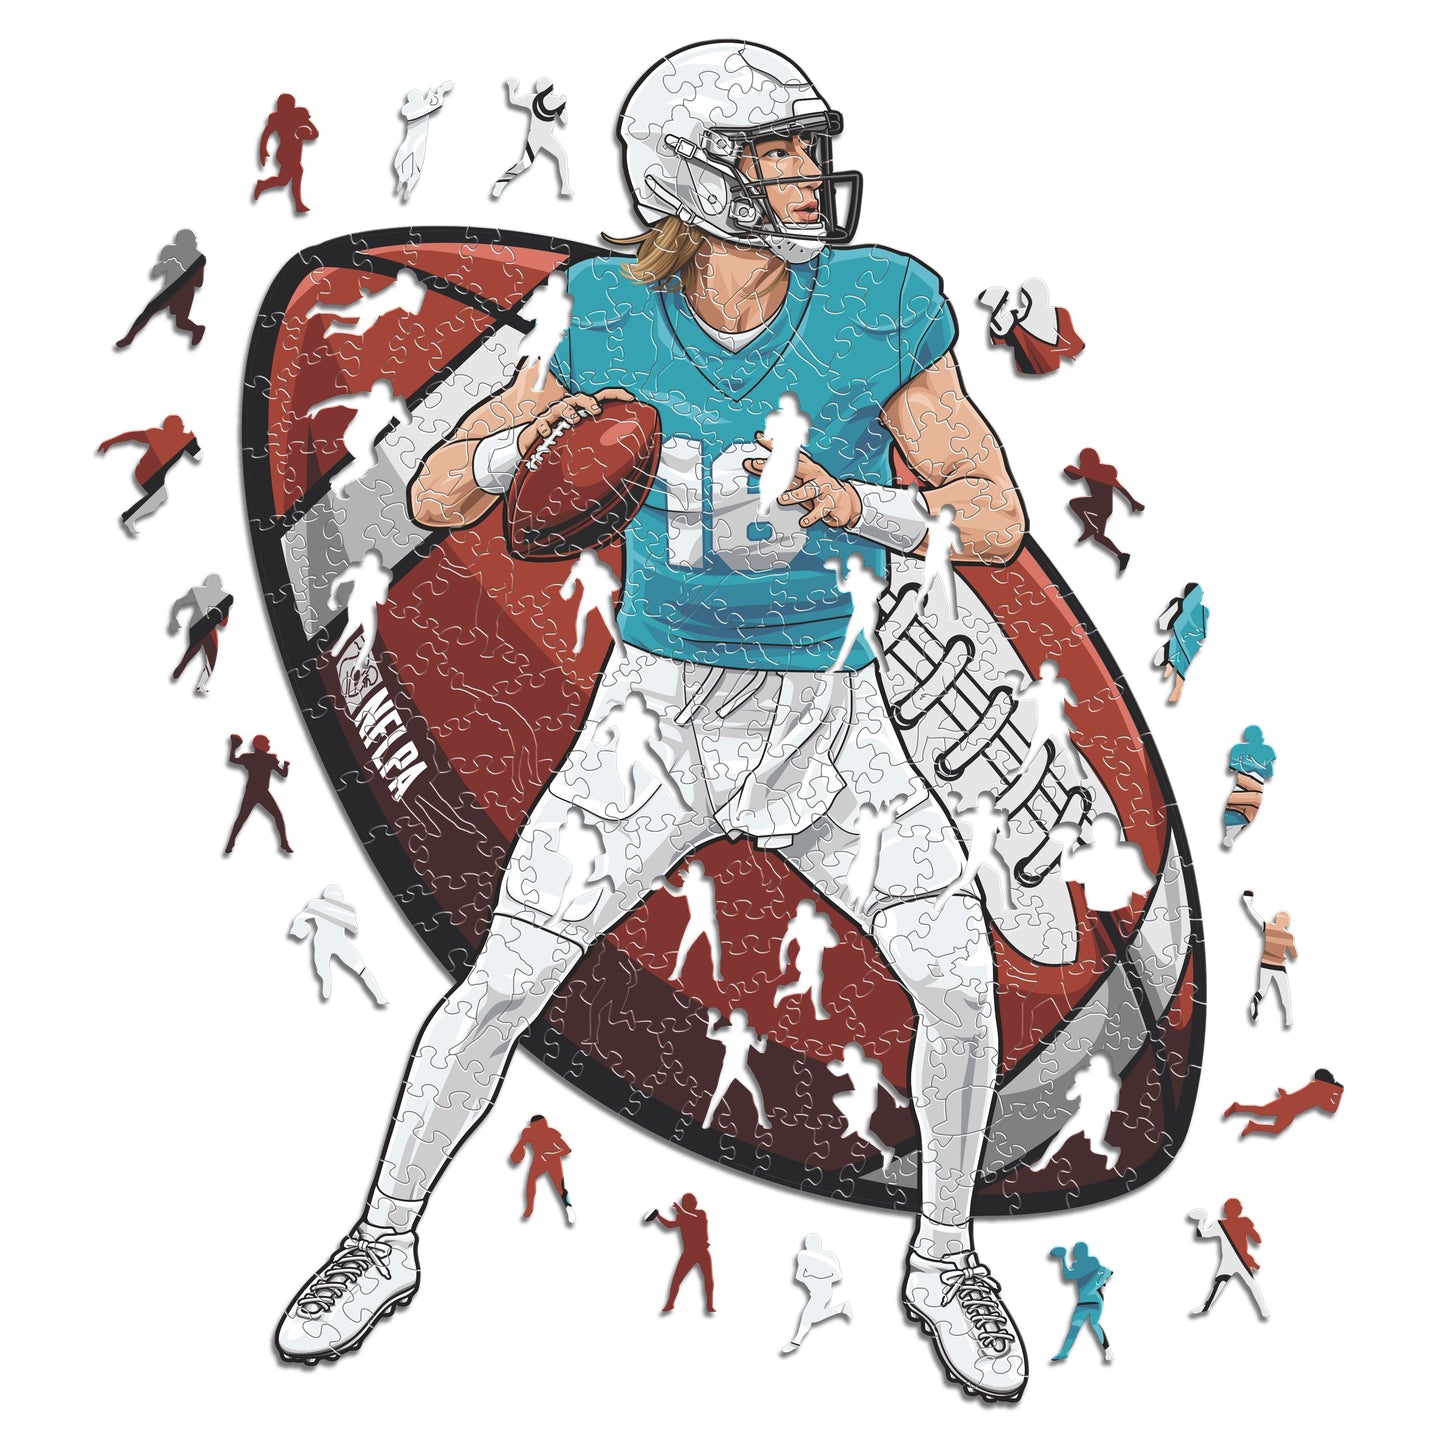 4 NFL Players Puzzles Of Your Choice (Up To 65% OFF)